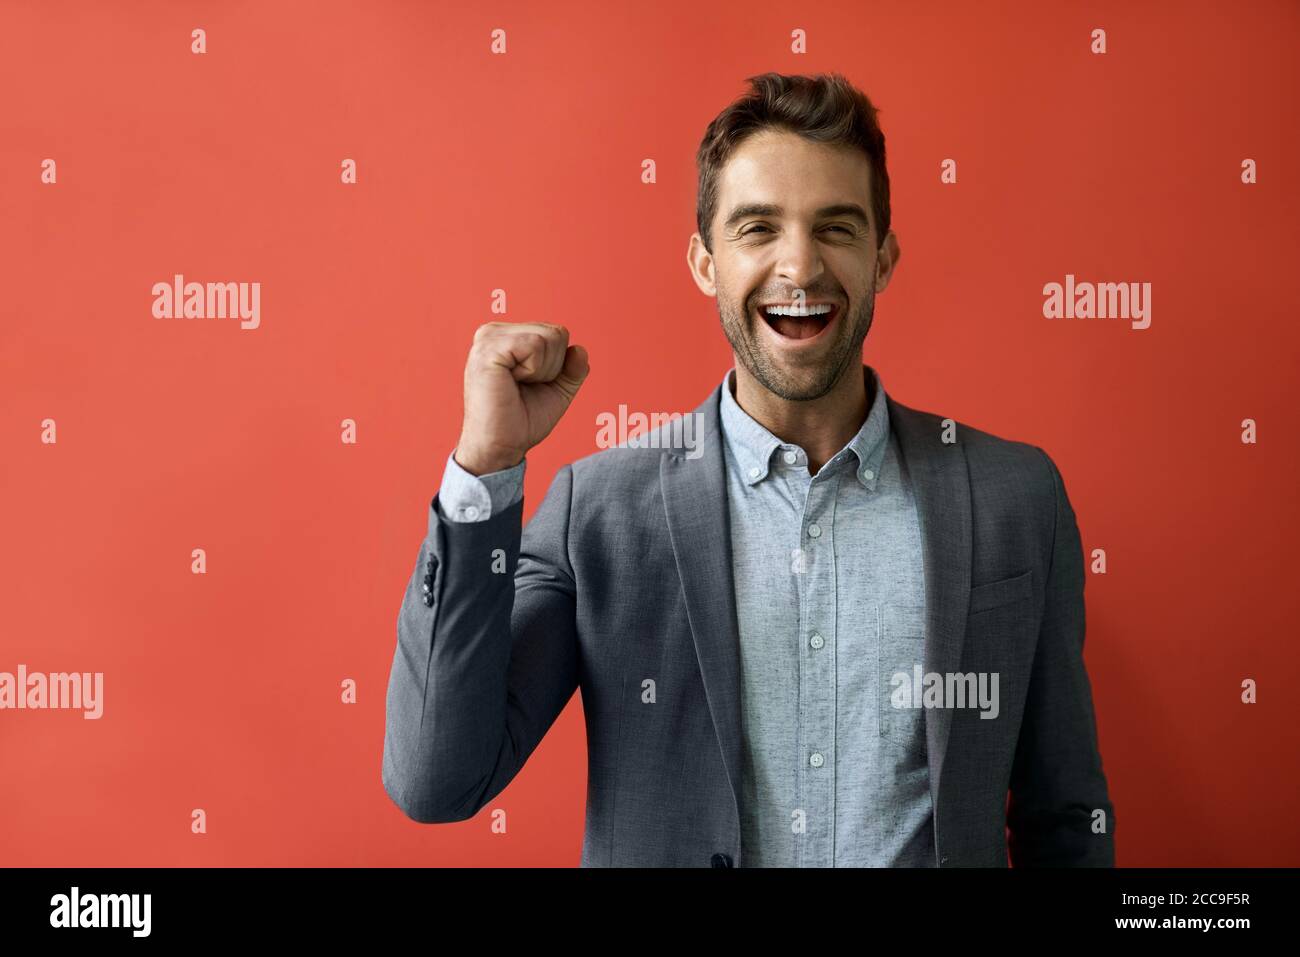 Ecstatic businessman cheering in front of a red background Stock Photo